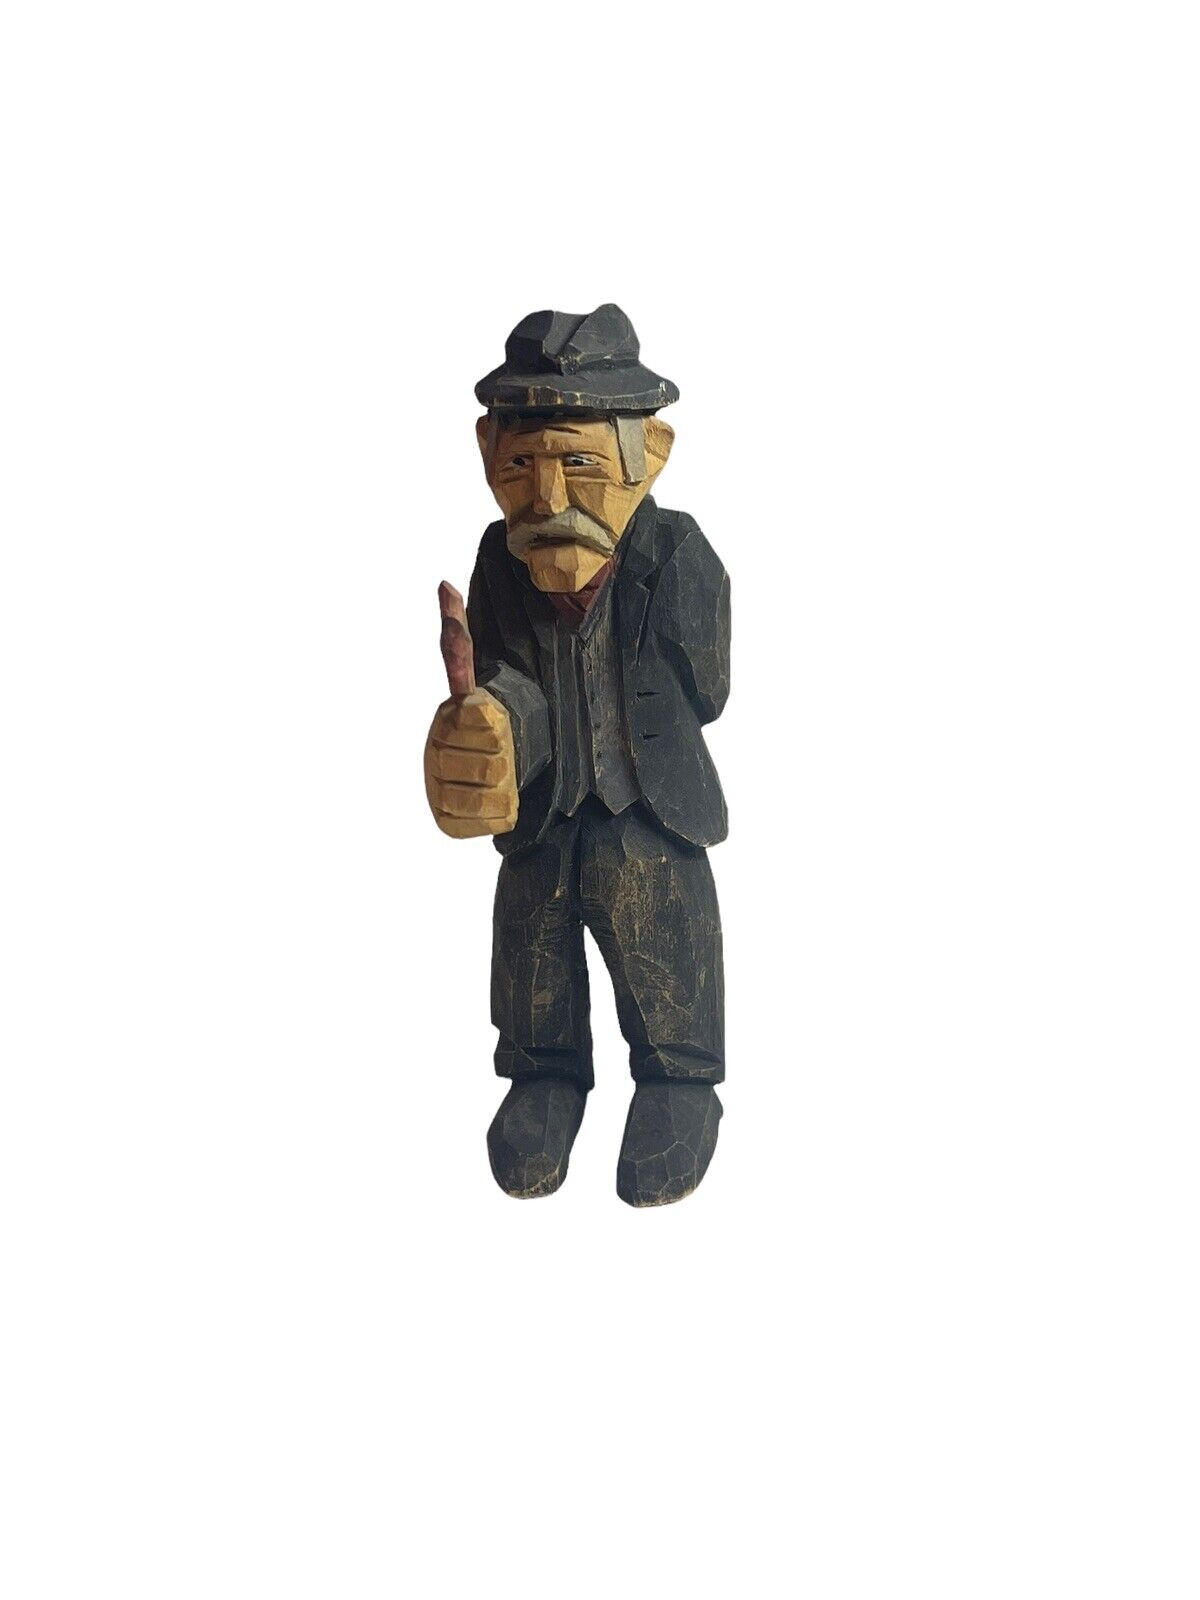 SIGNED. Vtg GUNNARSSON Swedish Carved -Hand Painted Wood Figure -Old Man #32